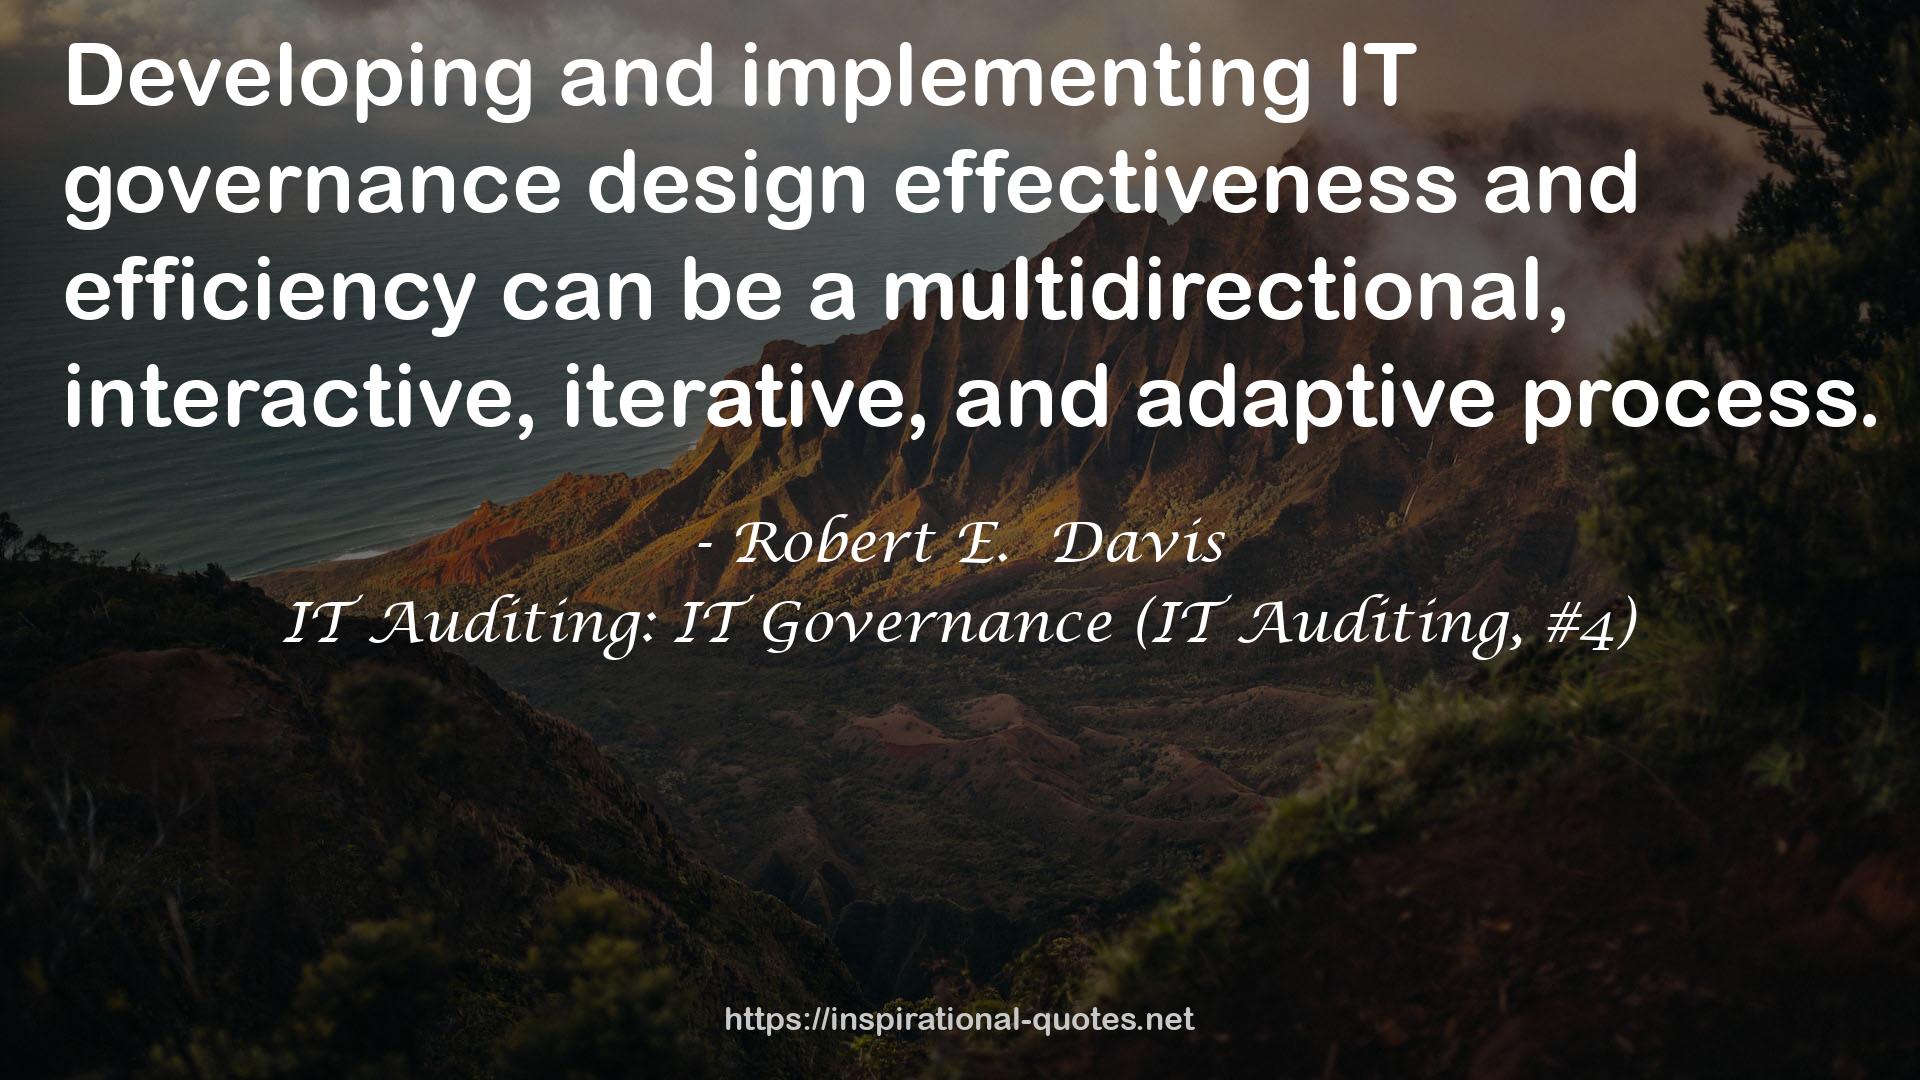 IT Auditing: IT Governance (IT Auditing, #4) QUOTES